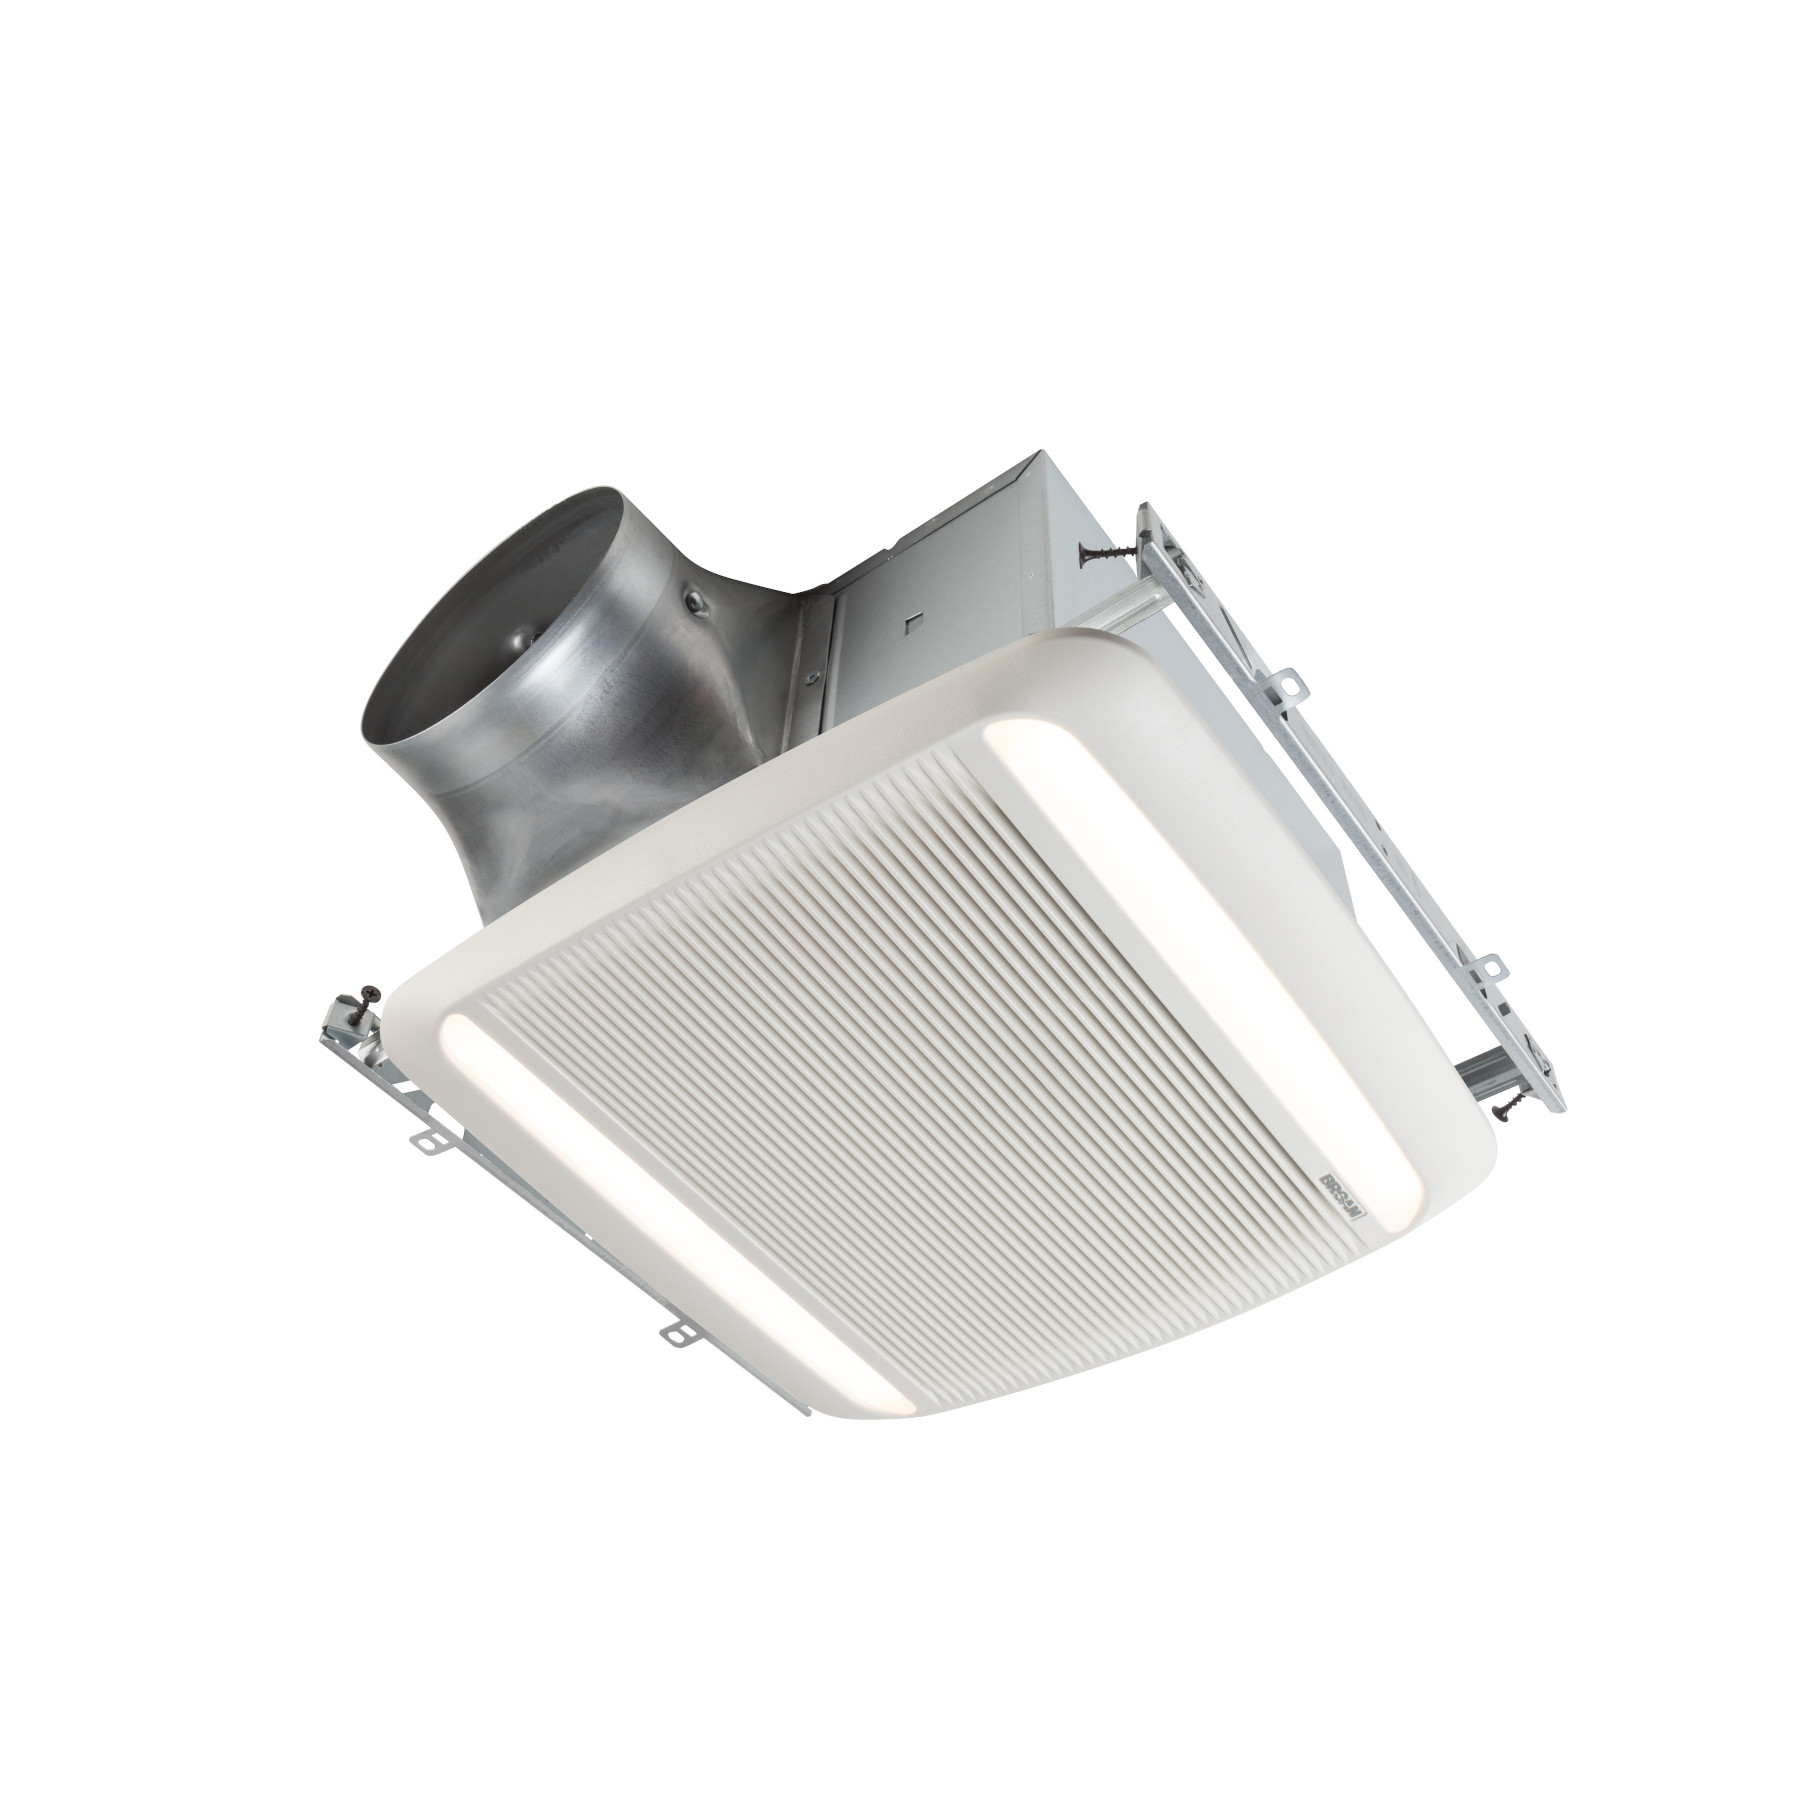 ULTRA GREEN XB Series 50 CFM Ceiling Bathroom Exhaust Fan with LED Light, ENERGY STAR® Certified